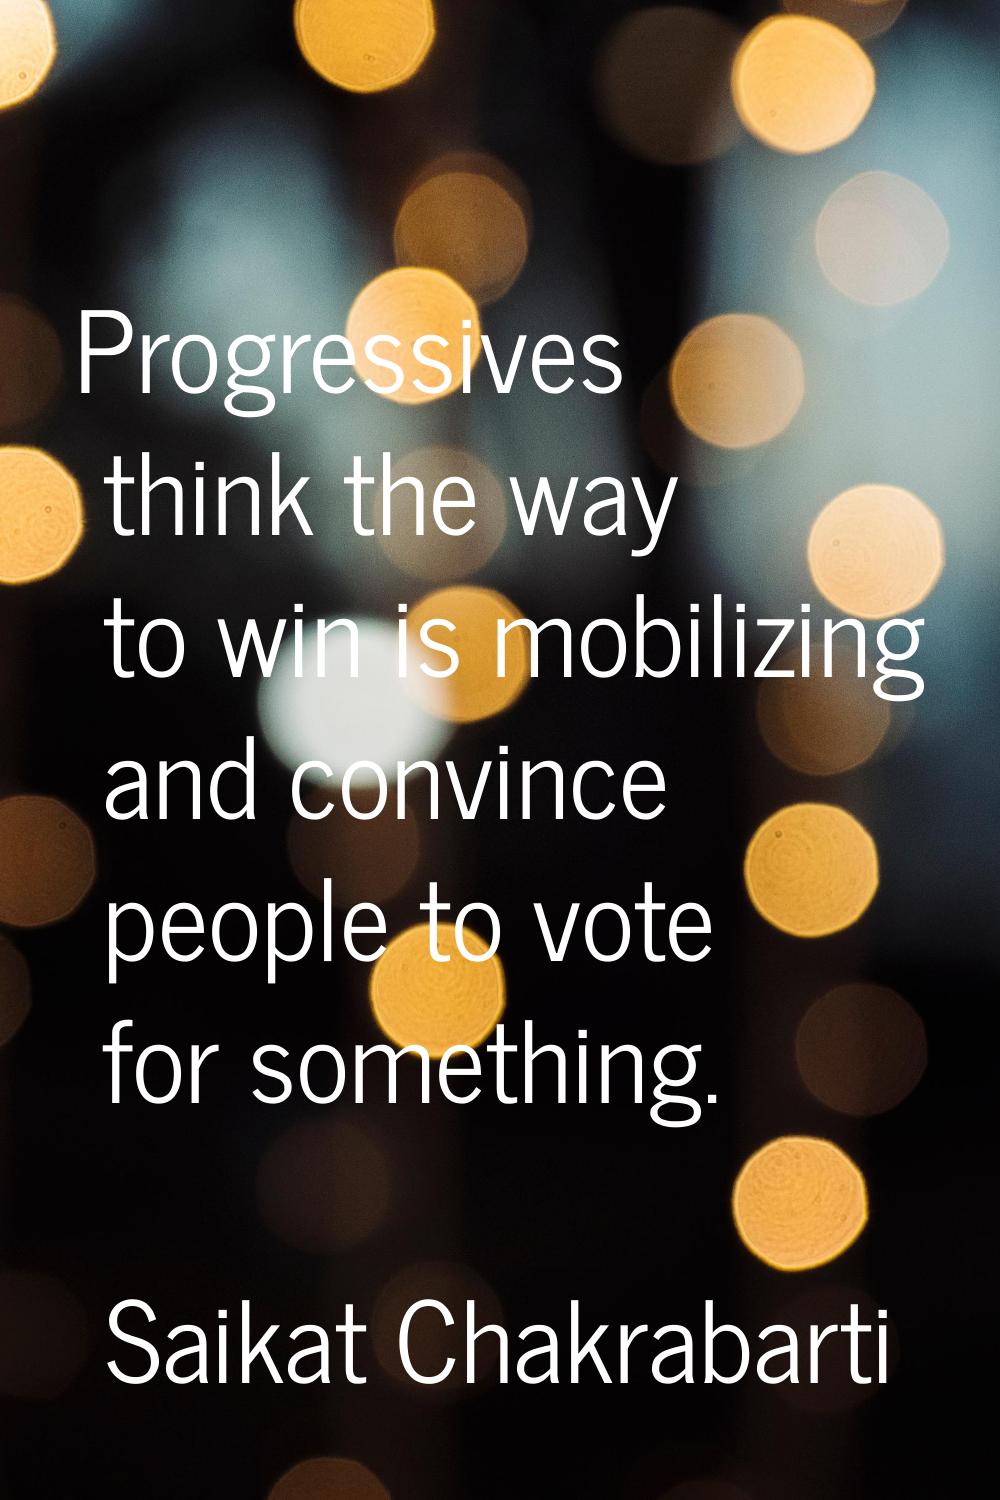 Progressives think the way to win is mobilizing and convince people to vote for something.